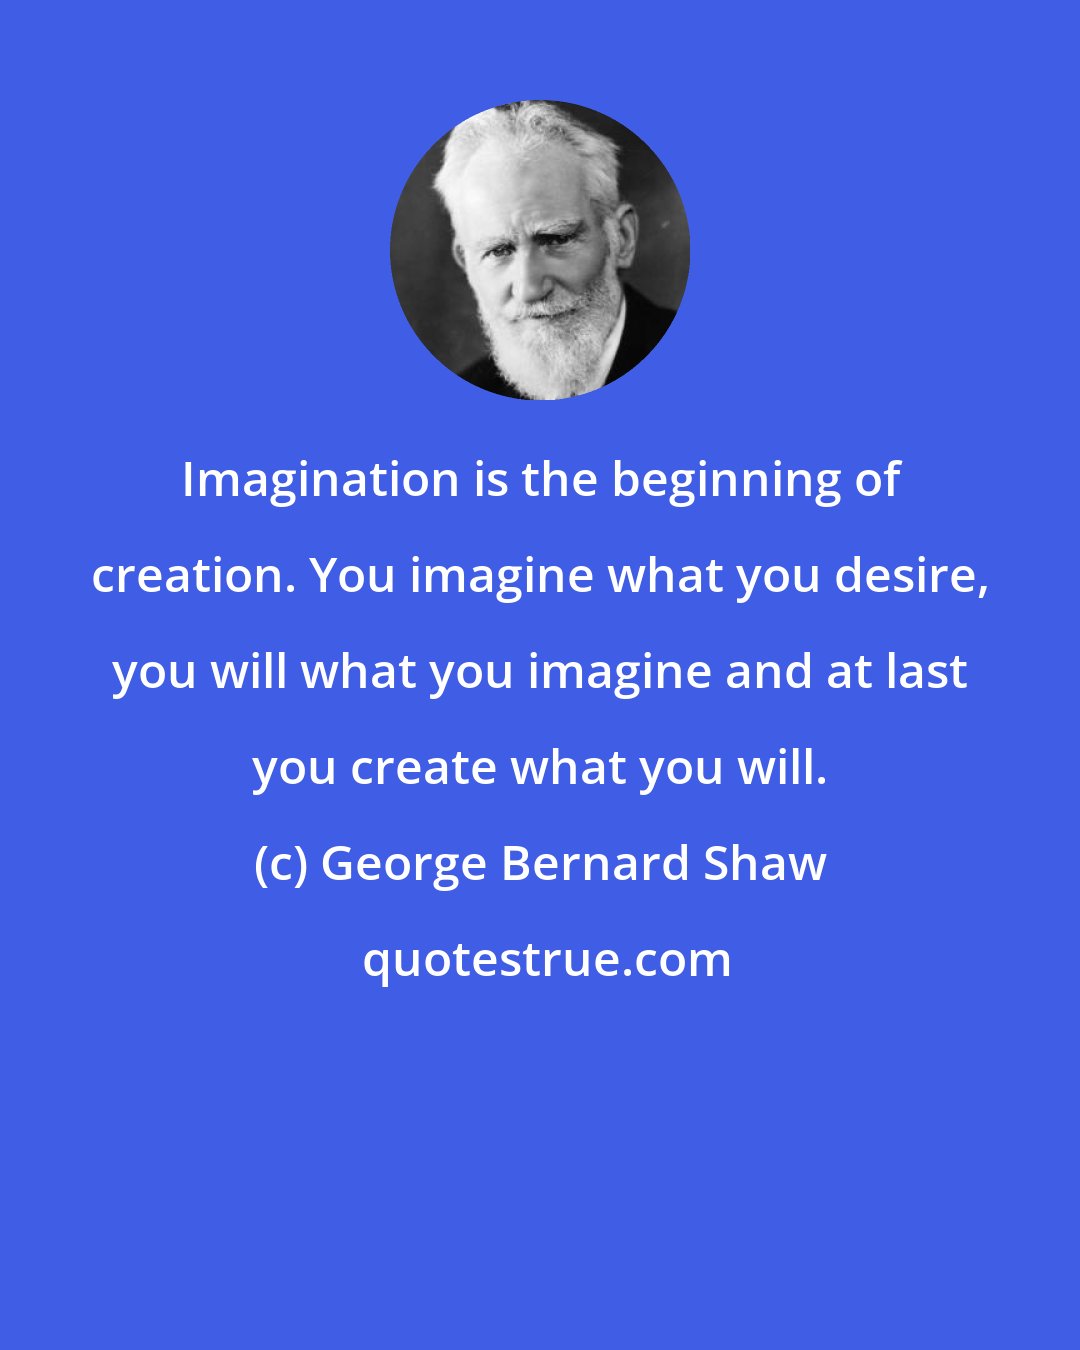 George Bernard Shaw: Imagination is the beginning of creation. You imagine what you desire, you will what you imagine and at last you create what you will.